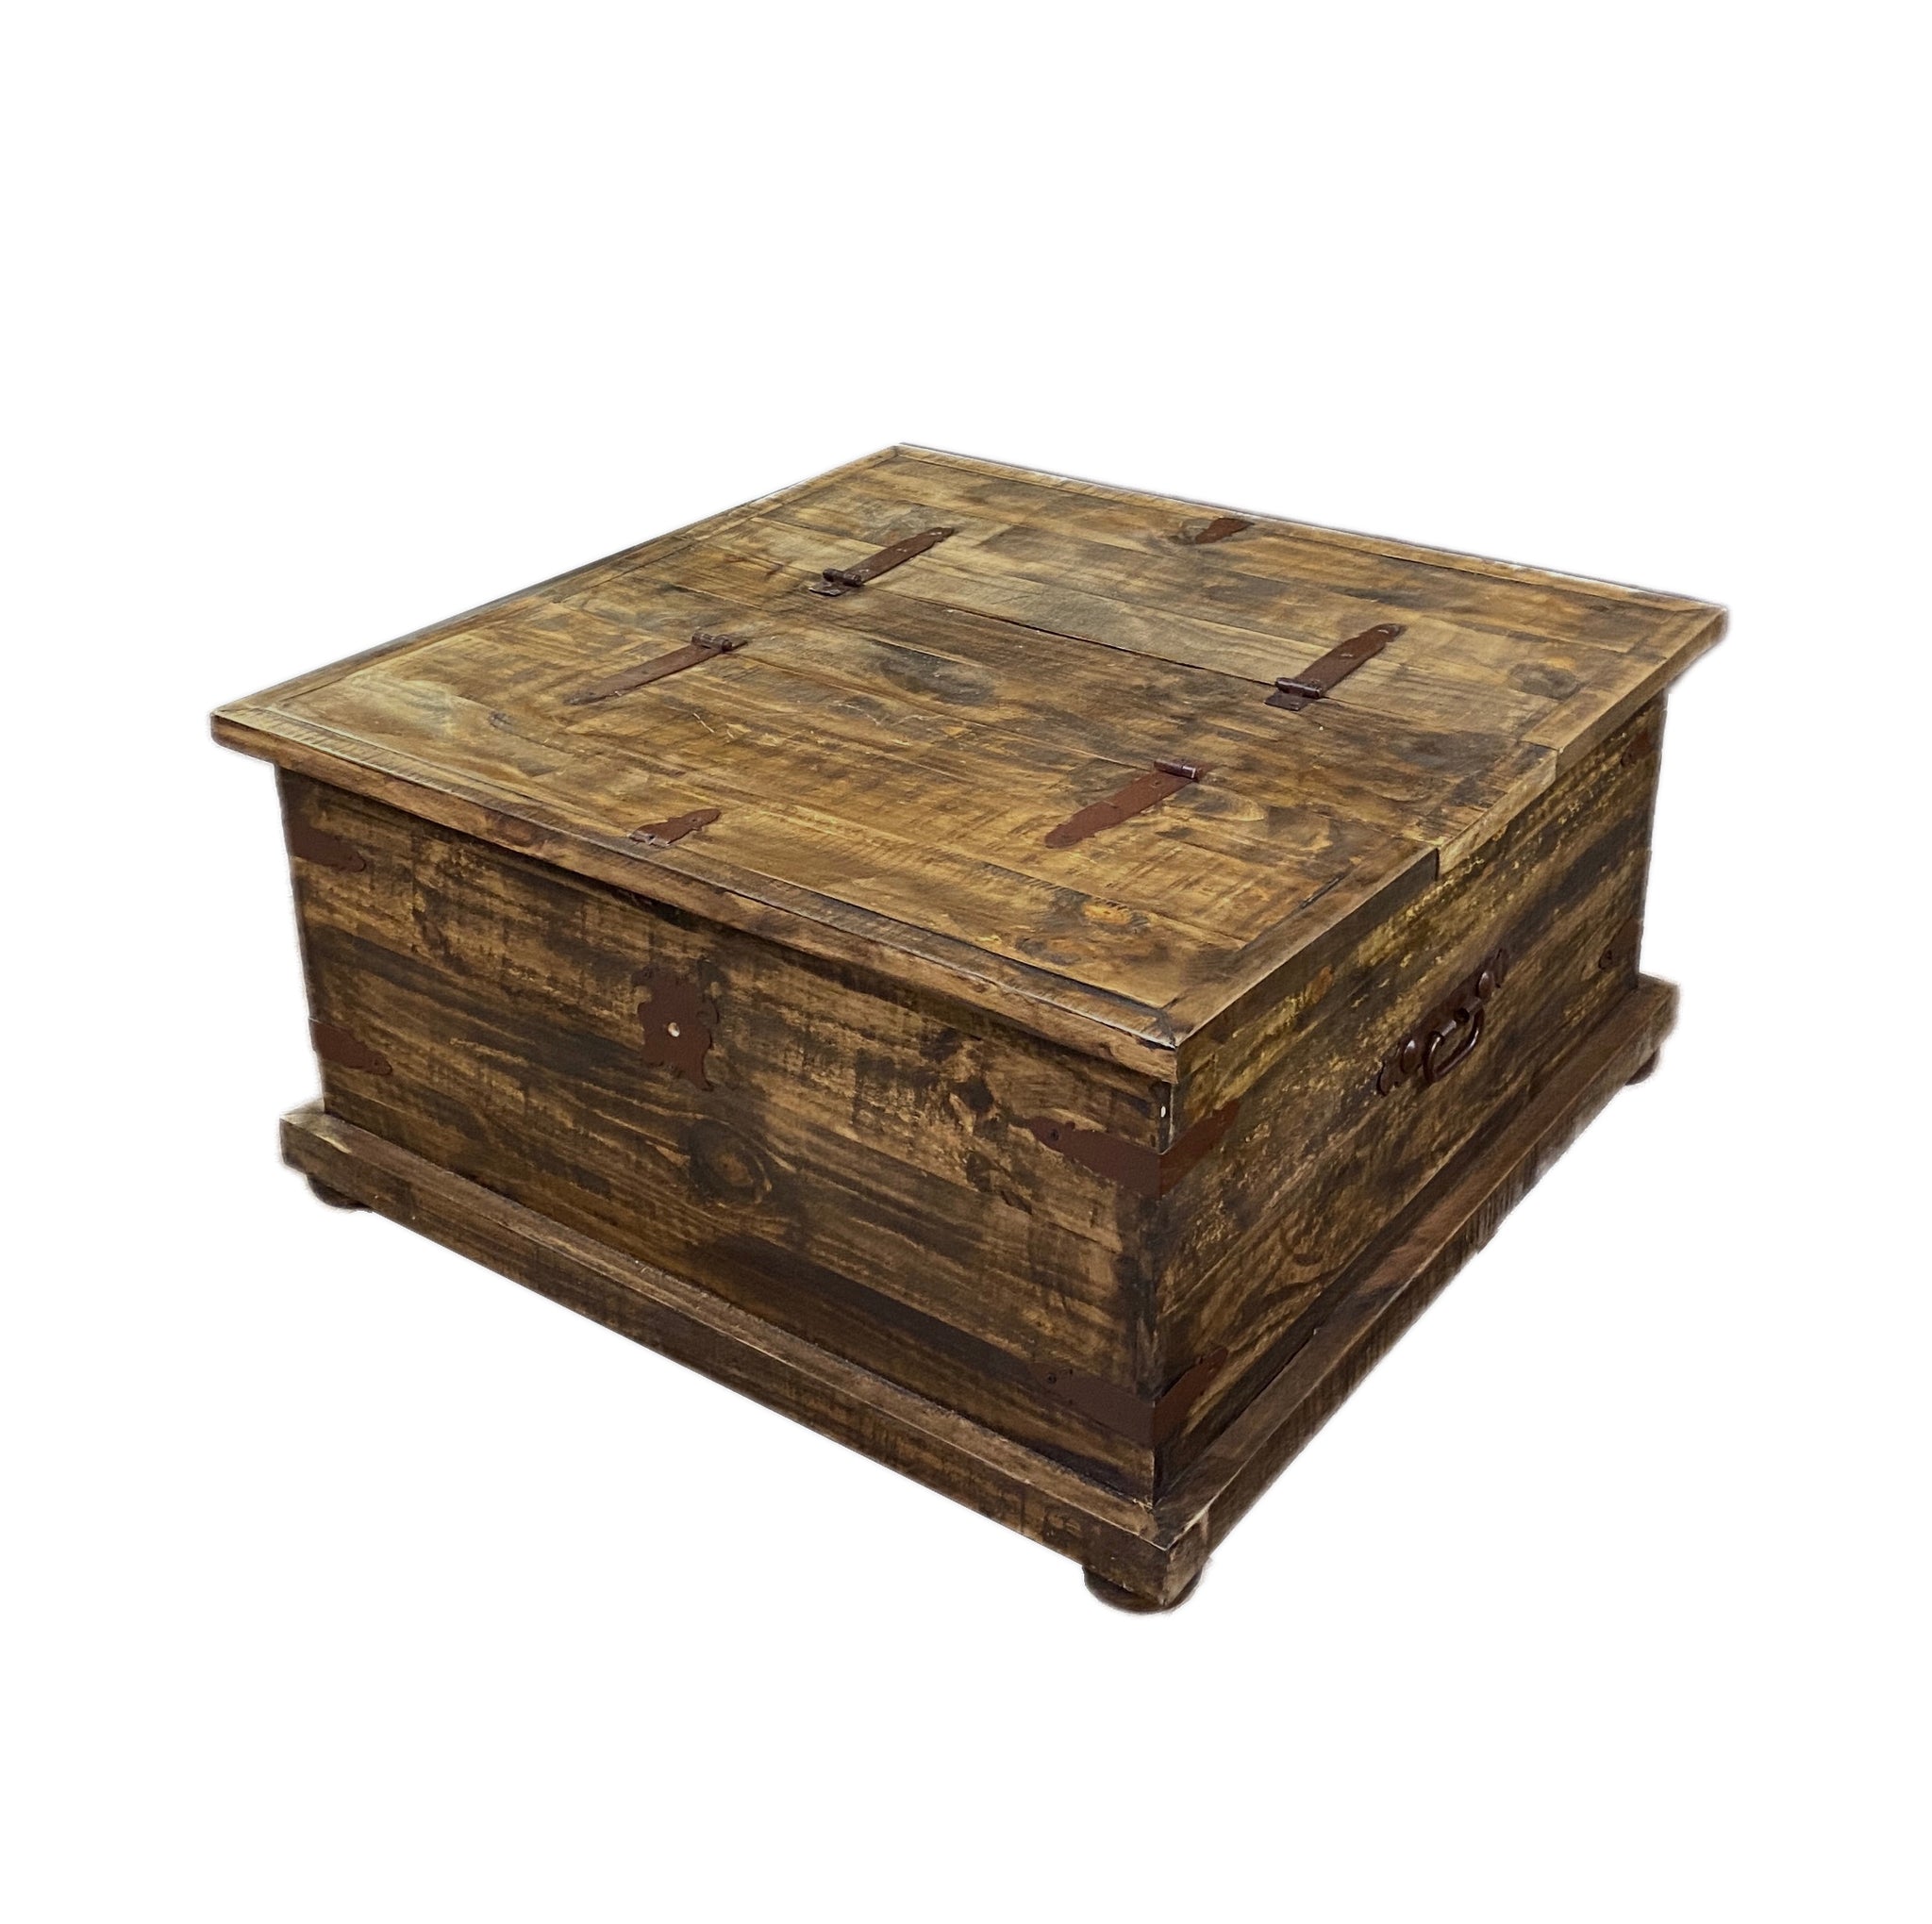 Canyon Trunk Coffee Table Set – Rustic Furniture Depot